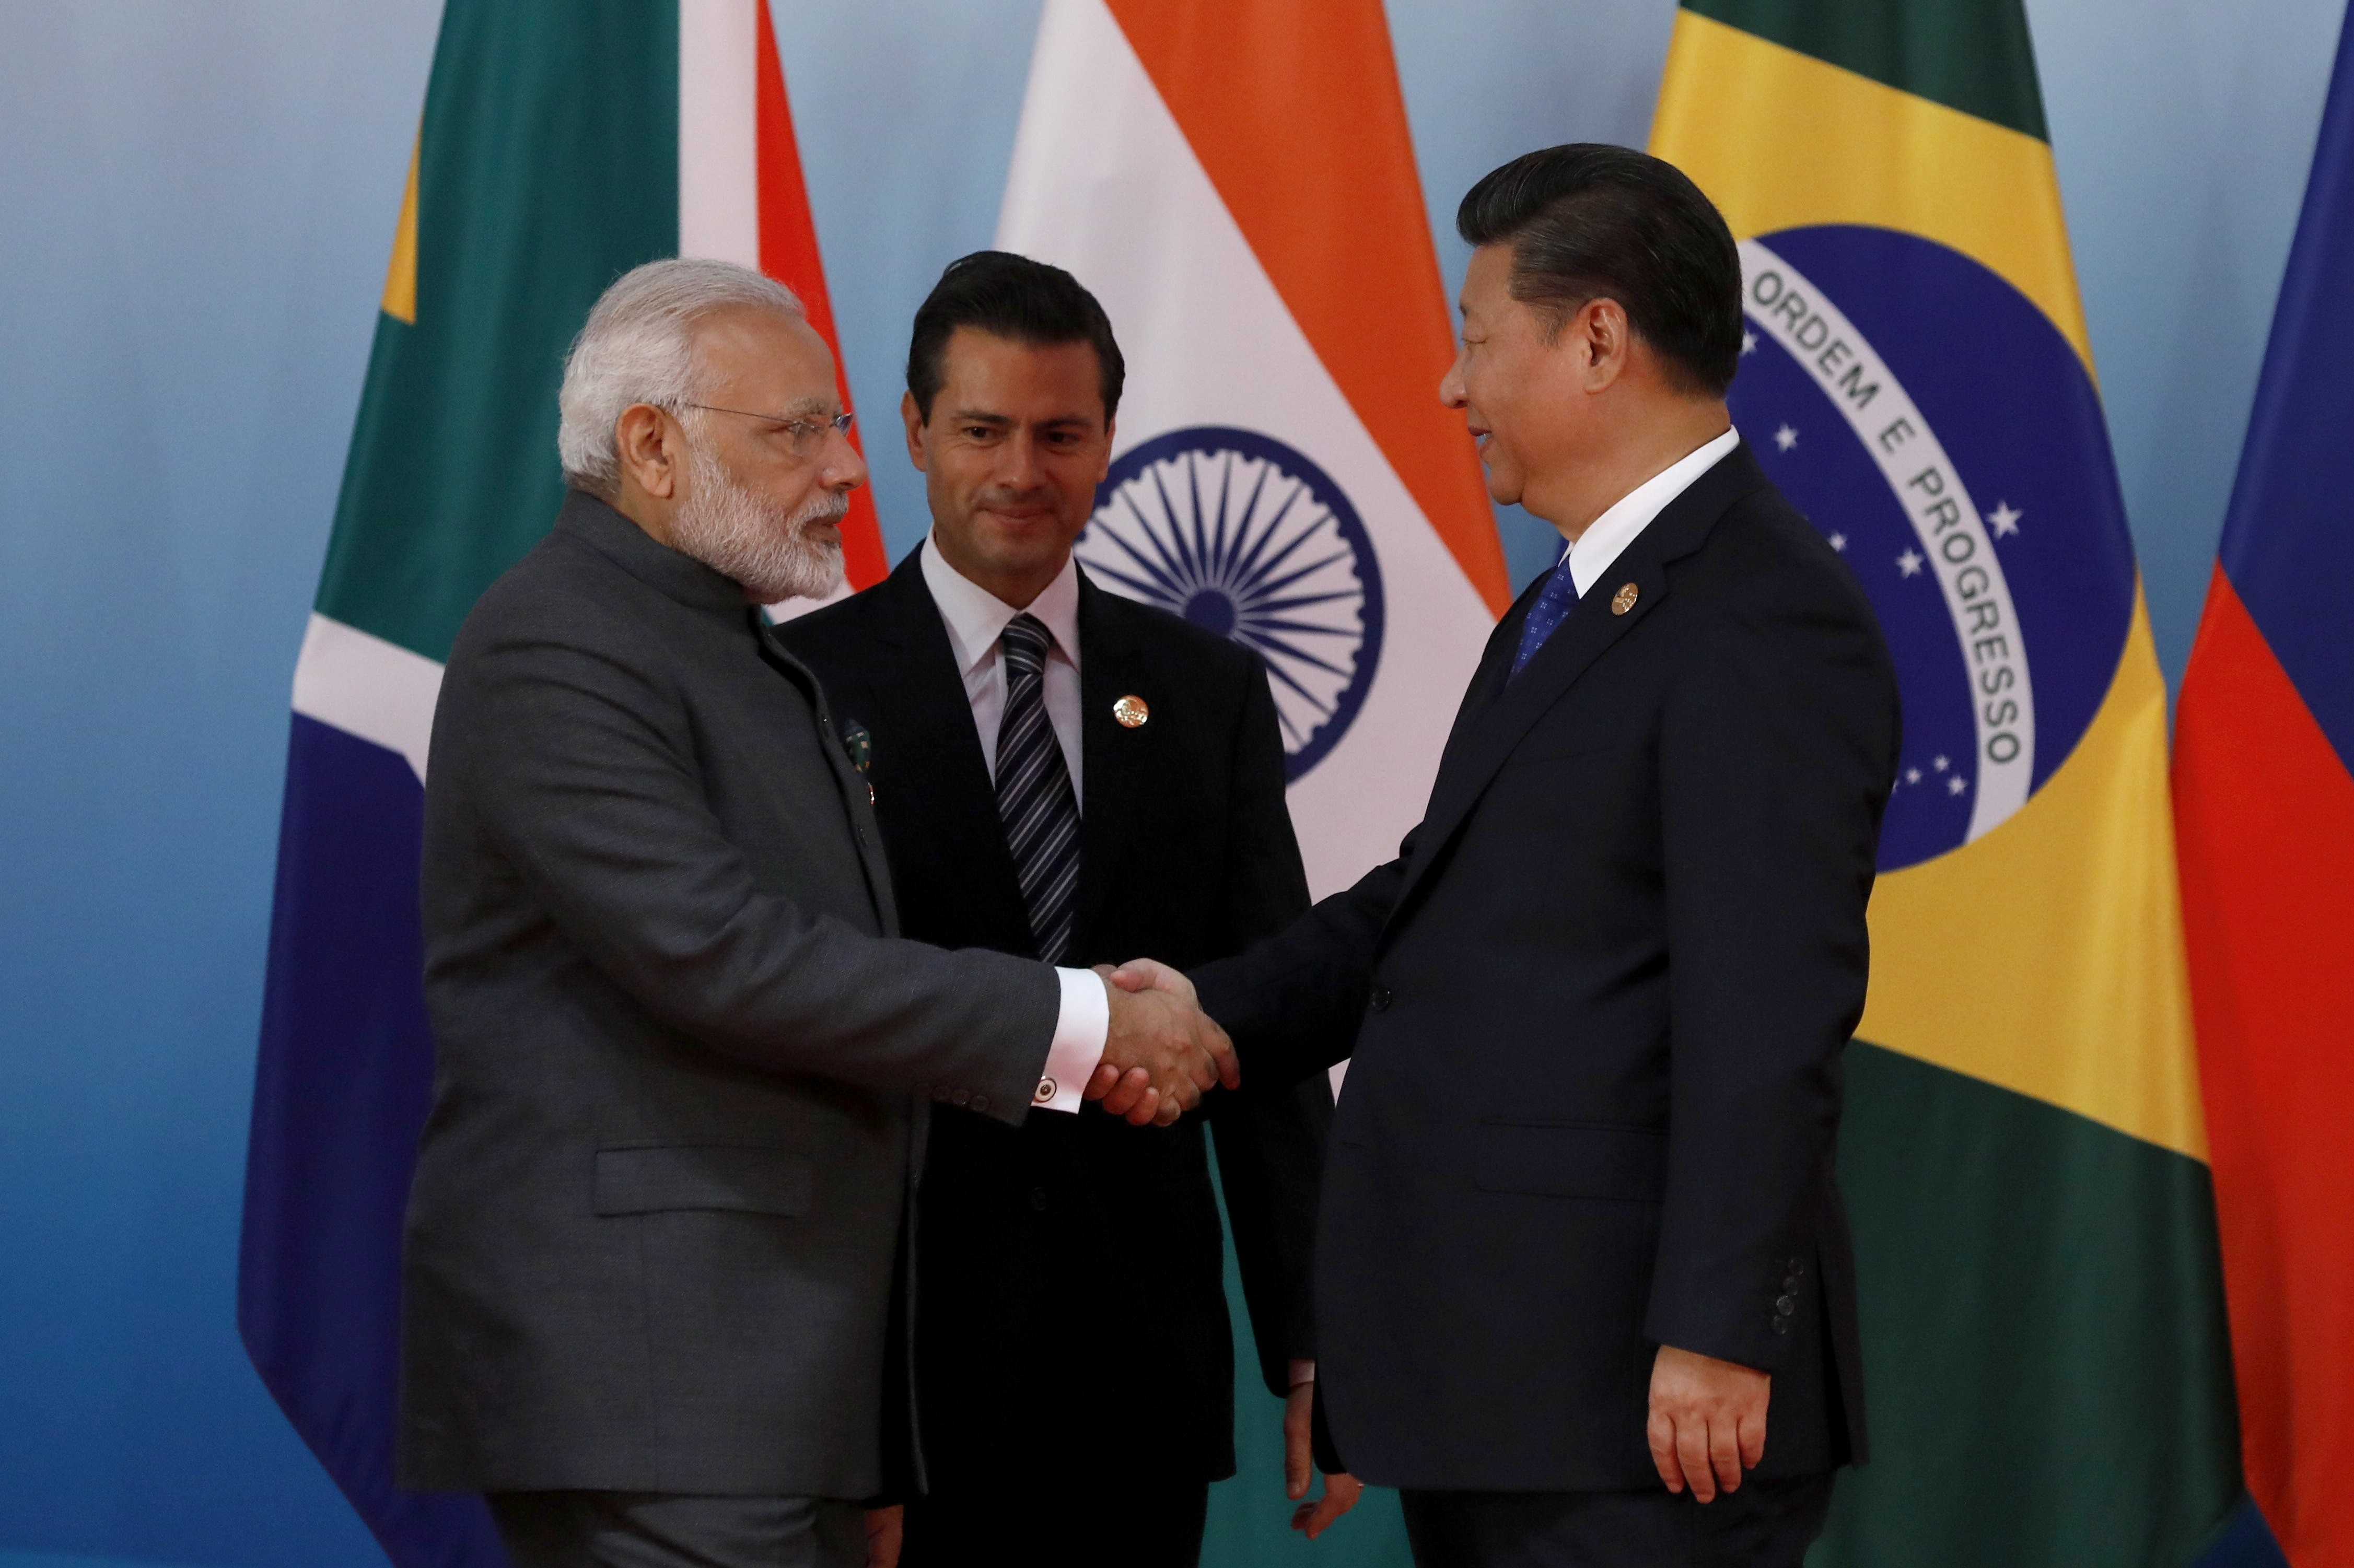 Indian Prime Minister Narendra Modi (left) greets Chinese President Xi Jinping while Mexican President Enrique Pena Nieto looks on, during the 2017 BRICS Summit in Xiamen, China, on September 5. Photo: EPA-EFE